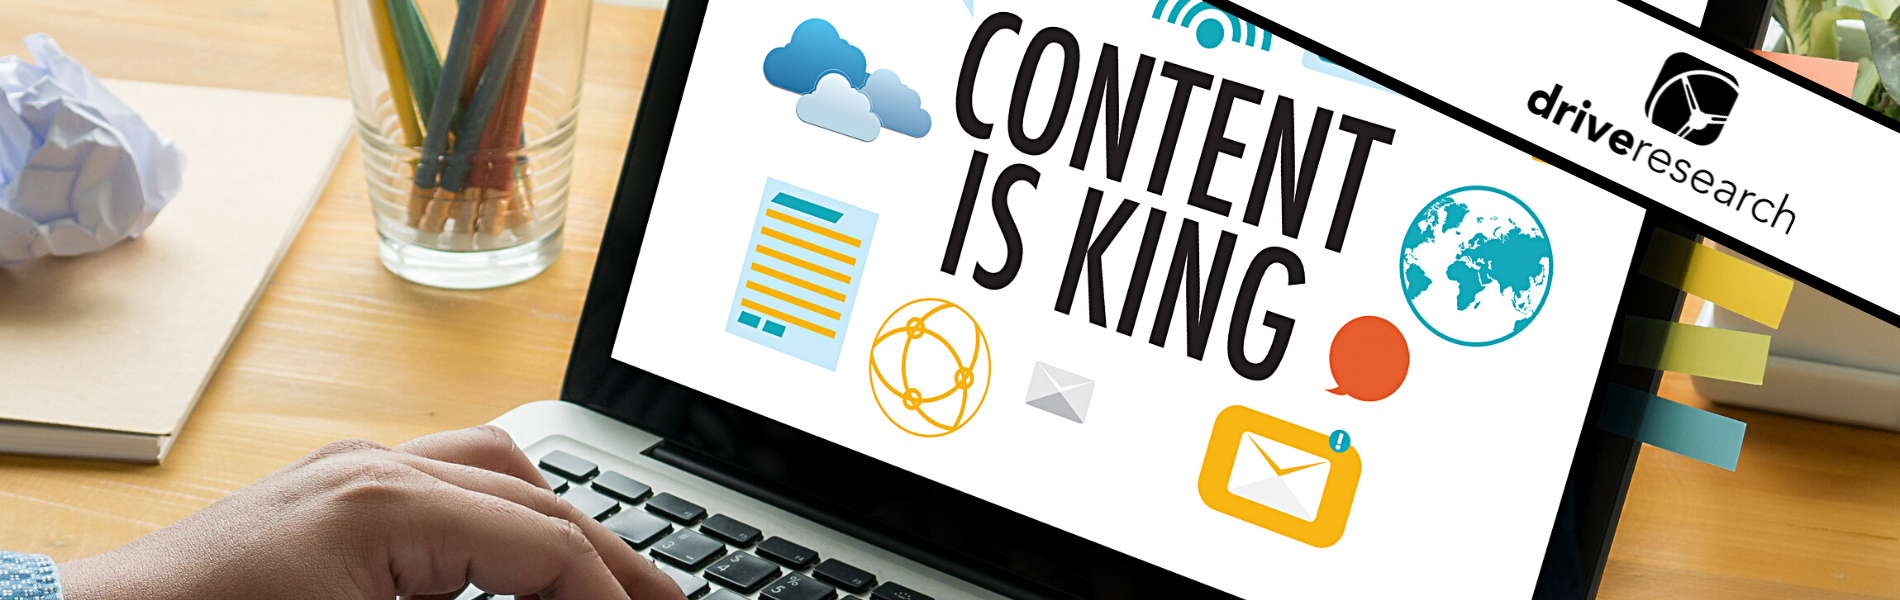 laptop that says content is king